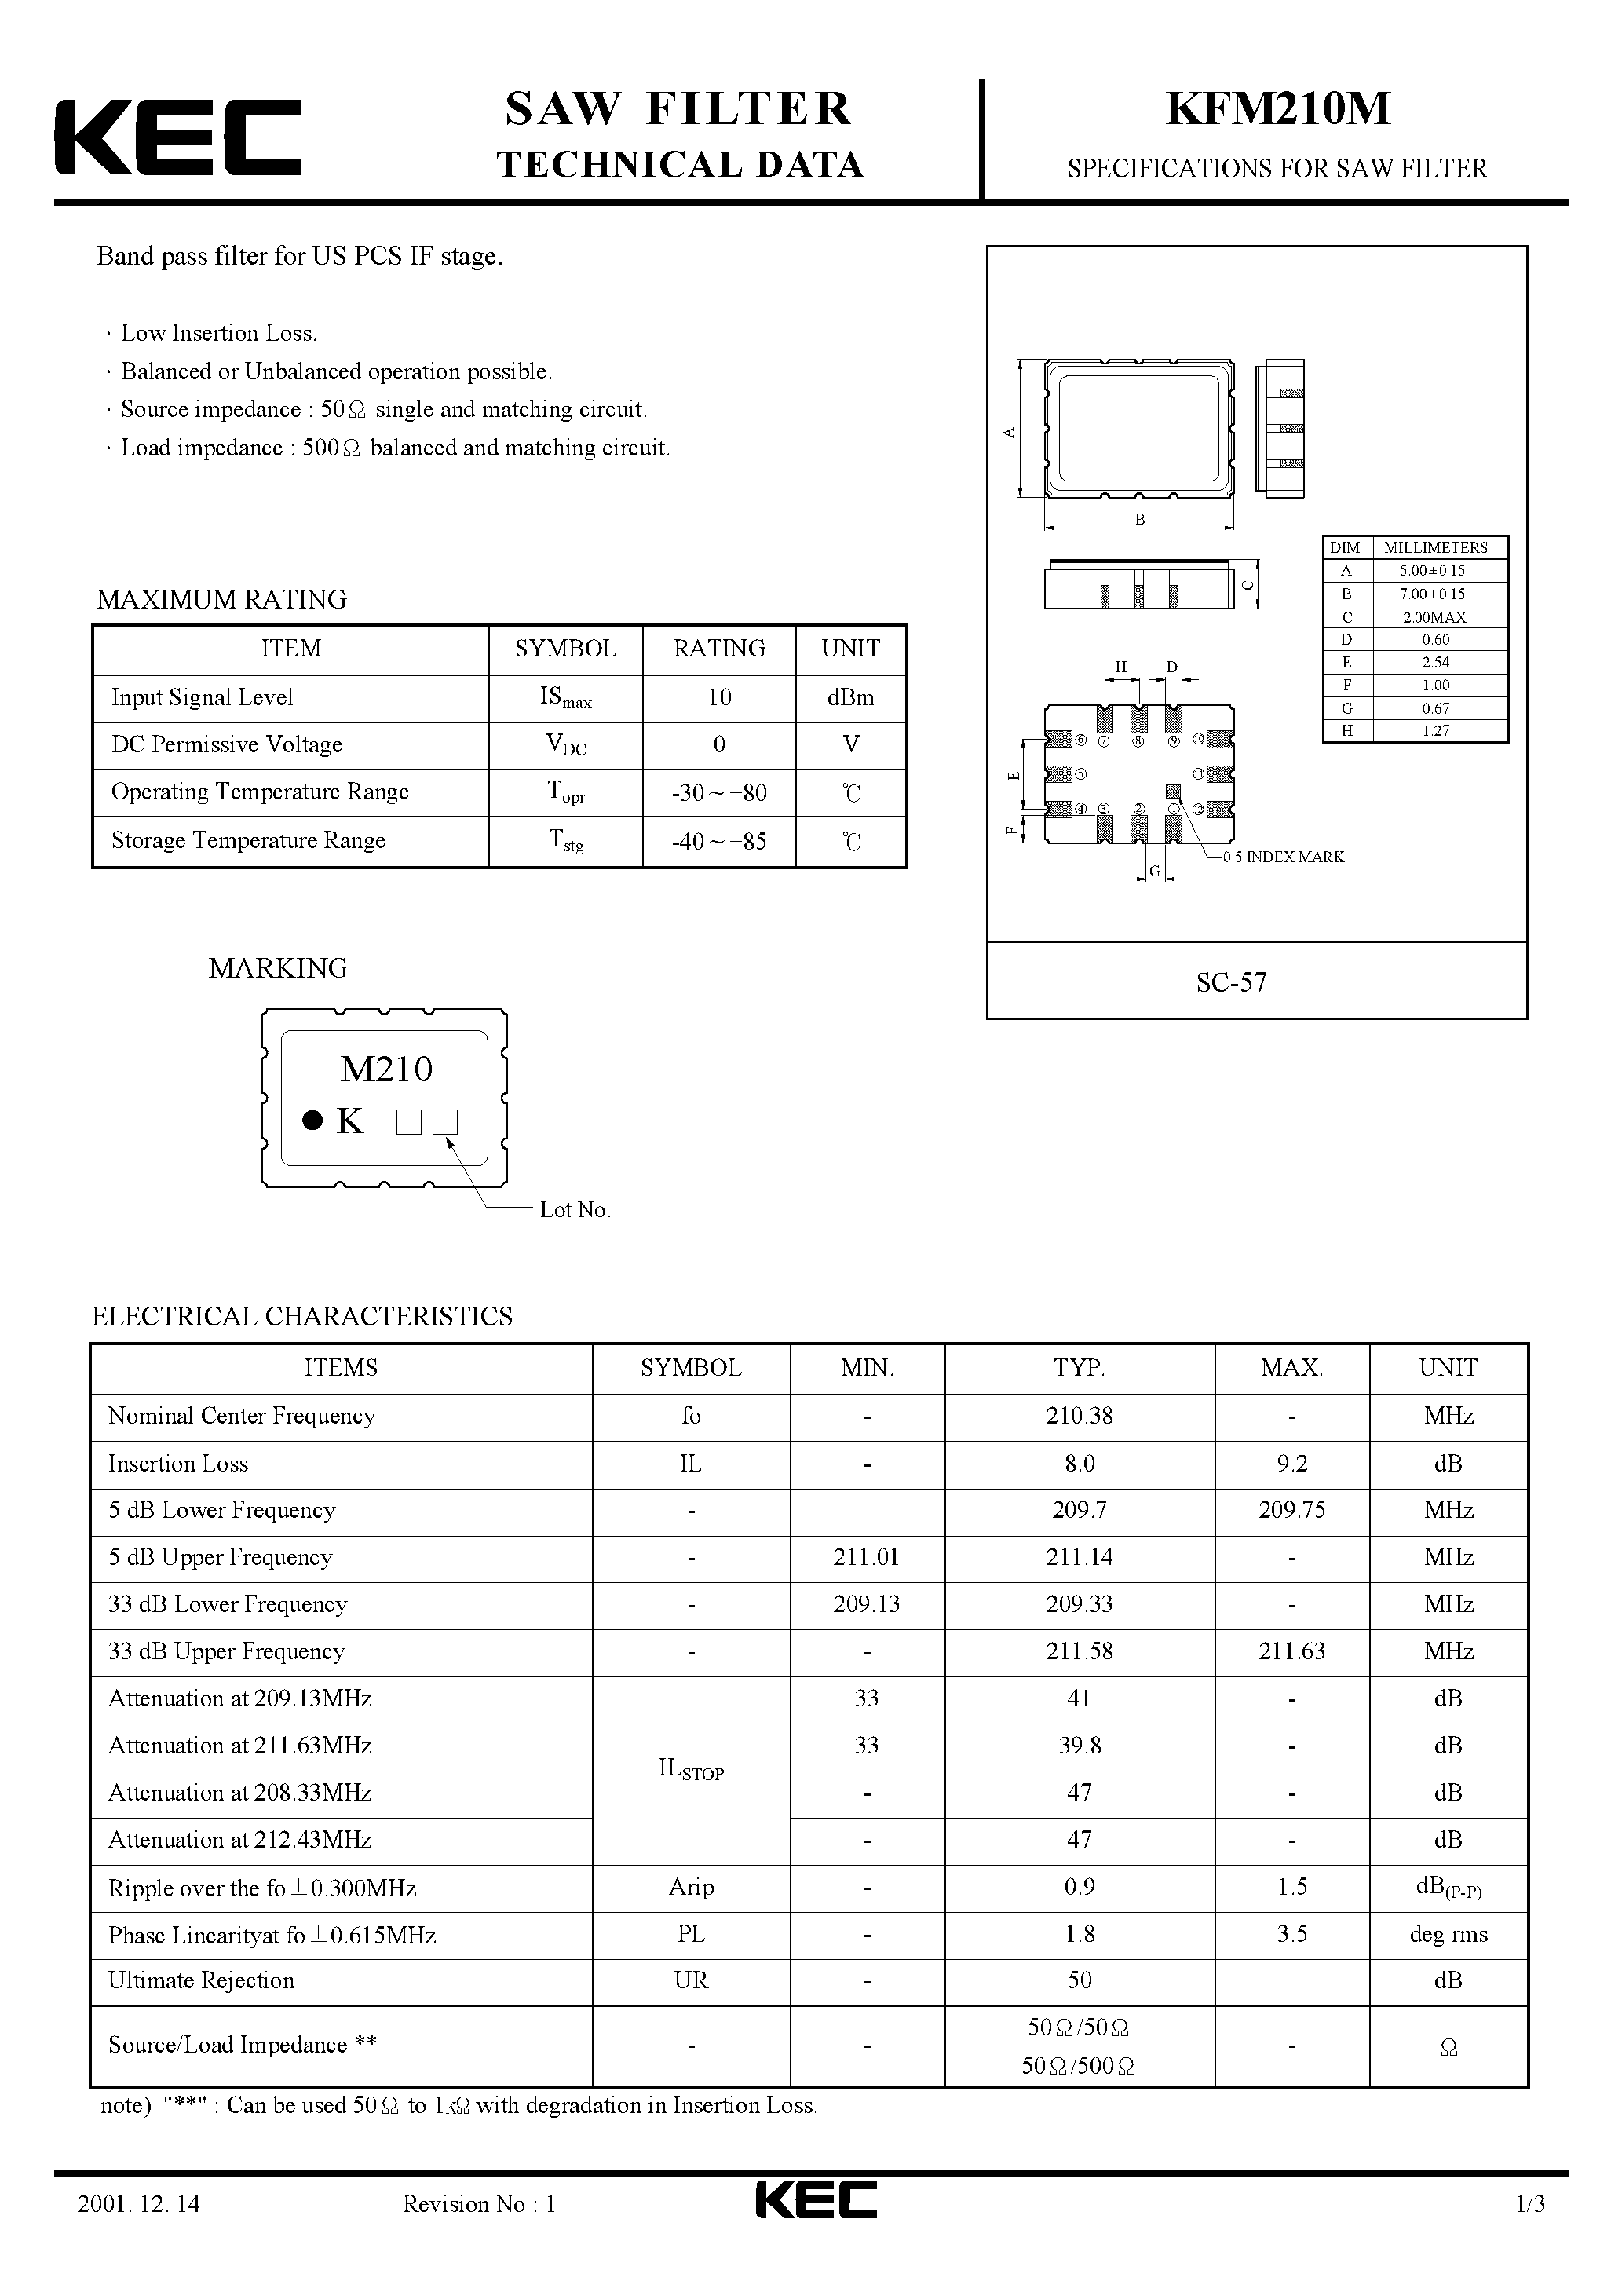 Datasheet KFM210M - SPECIFICATIONS FOR SAW FILTER(BAND PASS FILTERS FOR US PCS IF STAGE) page 1